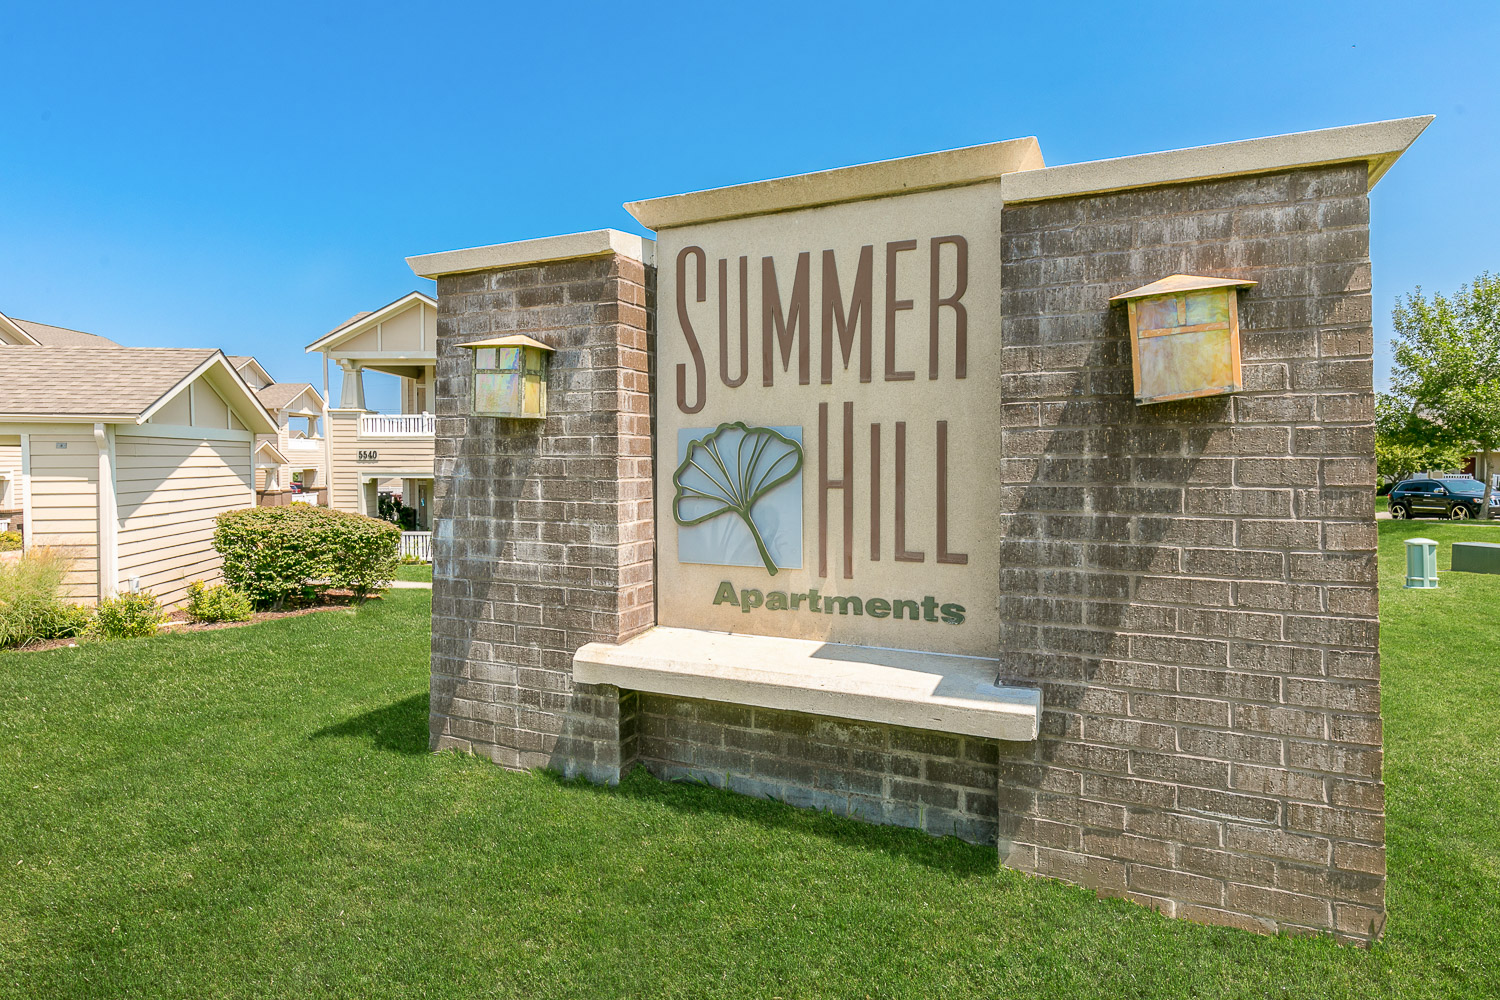 SUMMER HILL APARTMENTS AND TOWNHOMES